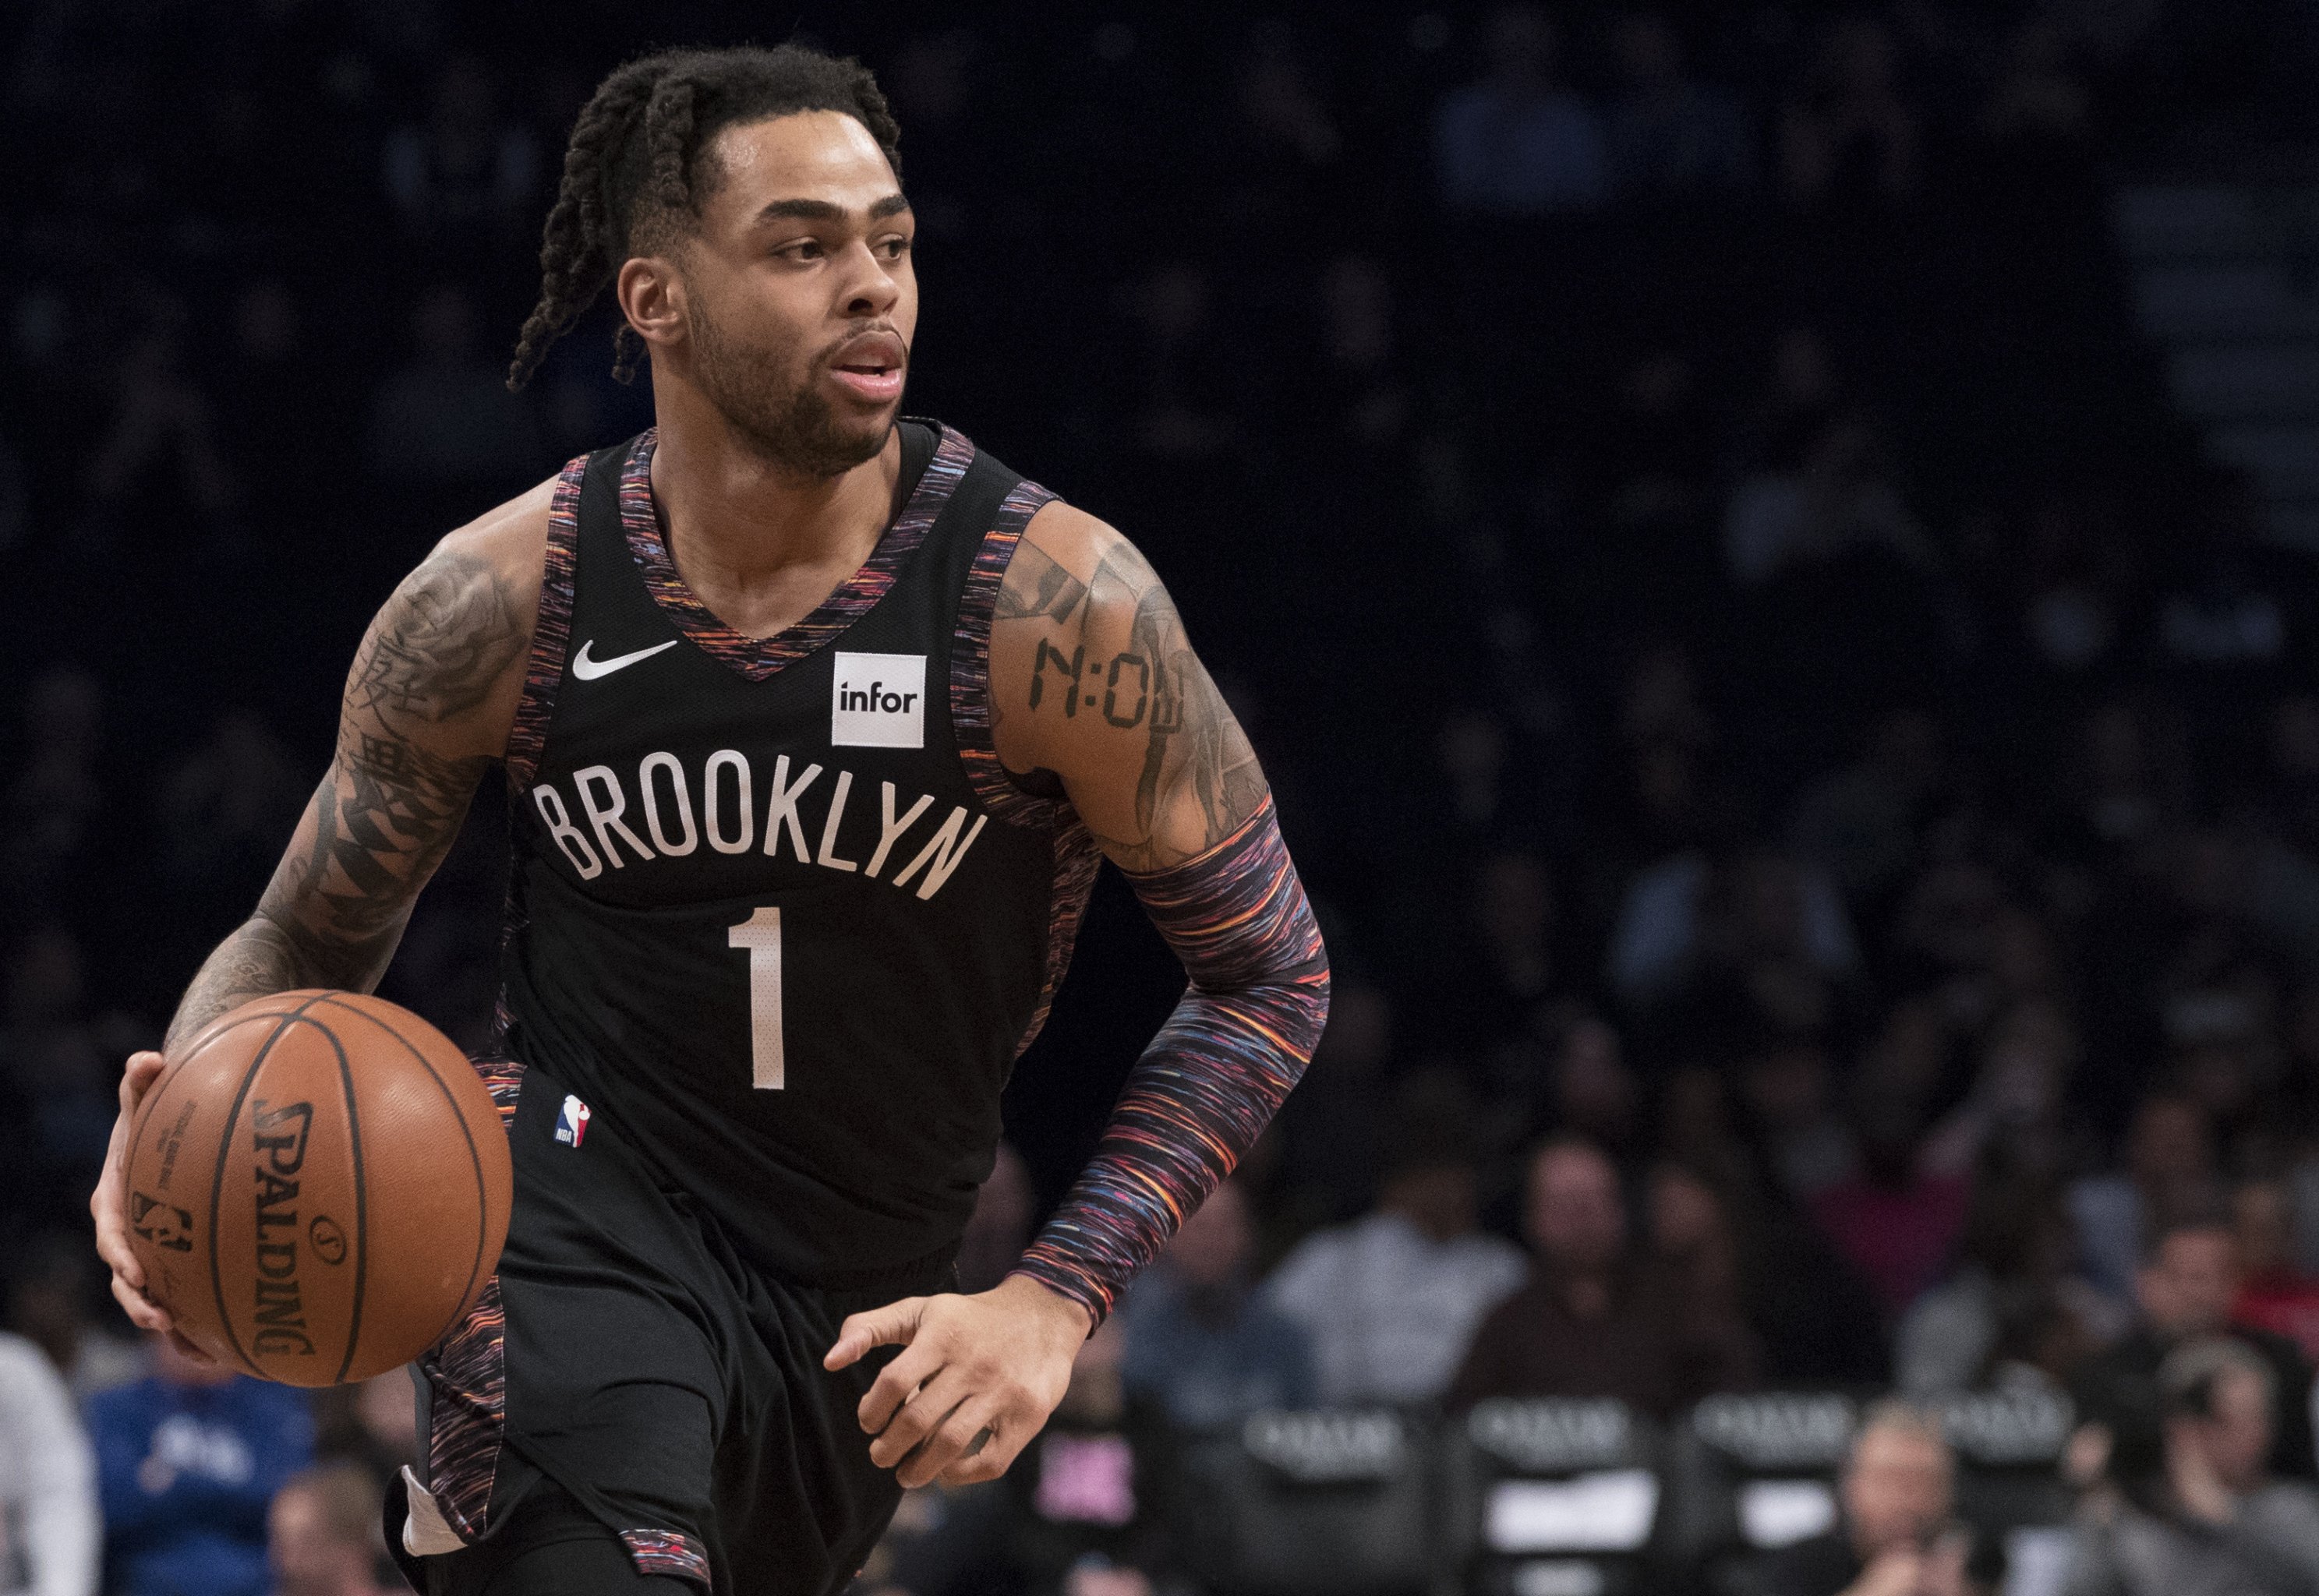 D'Angelo Russell 'definitely' wants to remain with the Brooklyn Nets